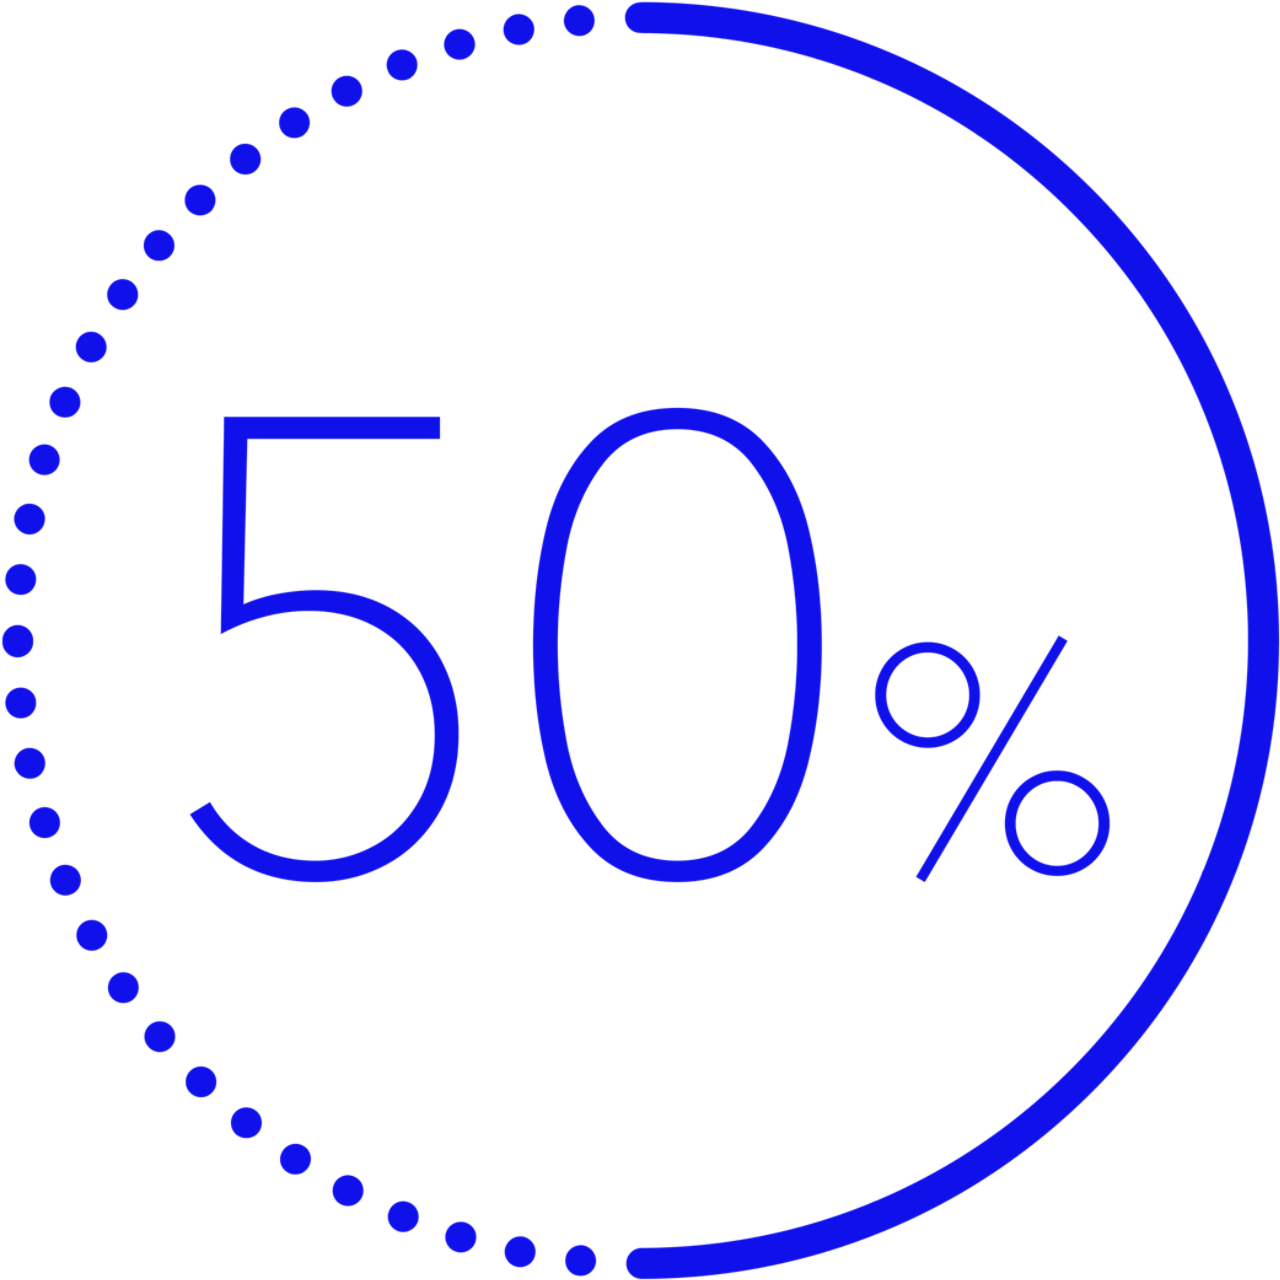 A graphic image of fifty percent in numeric form